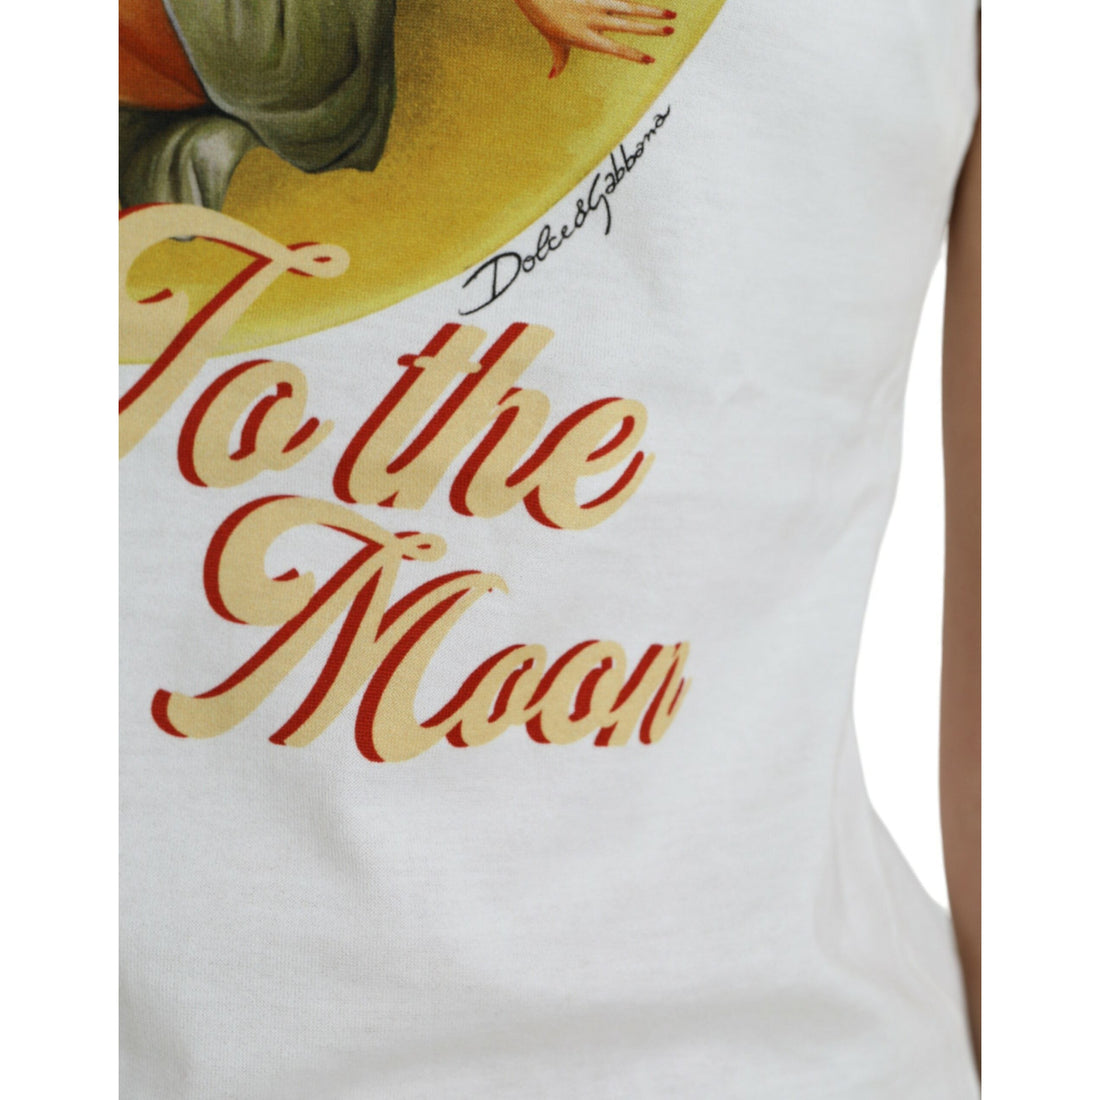 Dolce & Gabbana White Bring Me To The Moon T-shirt Top